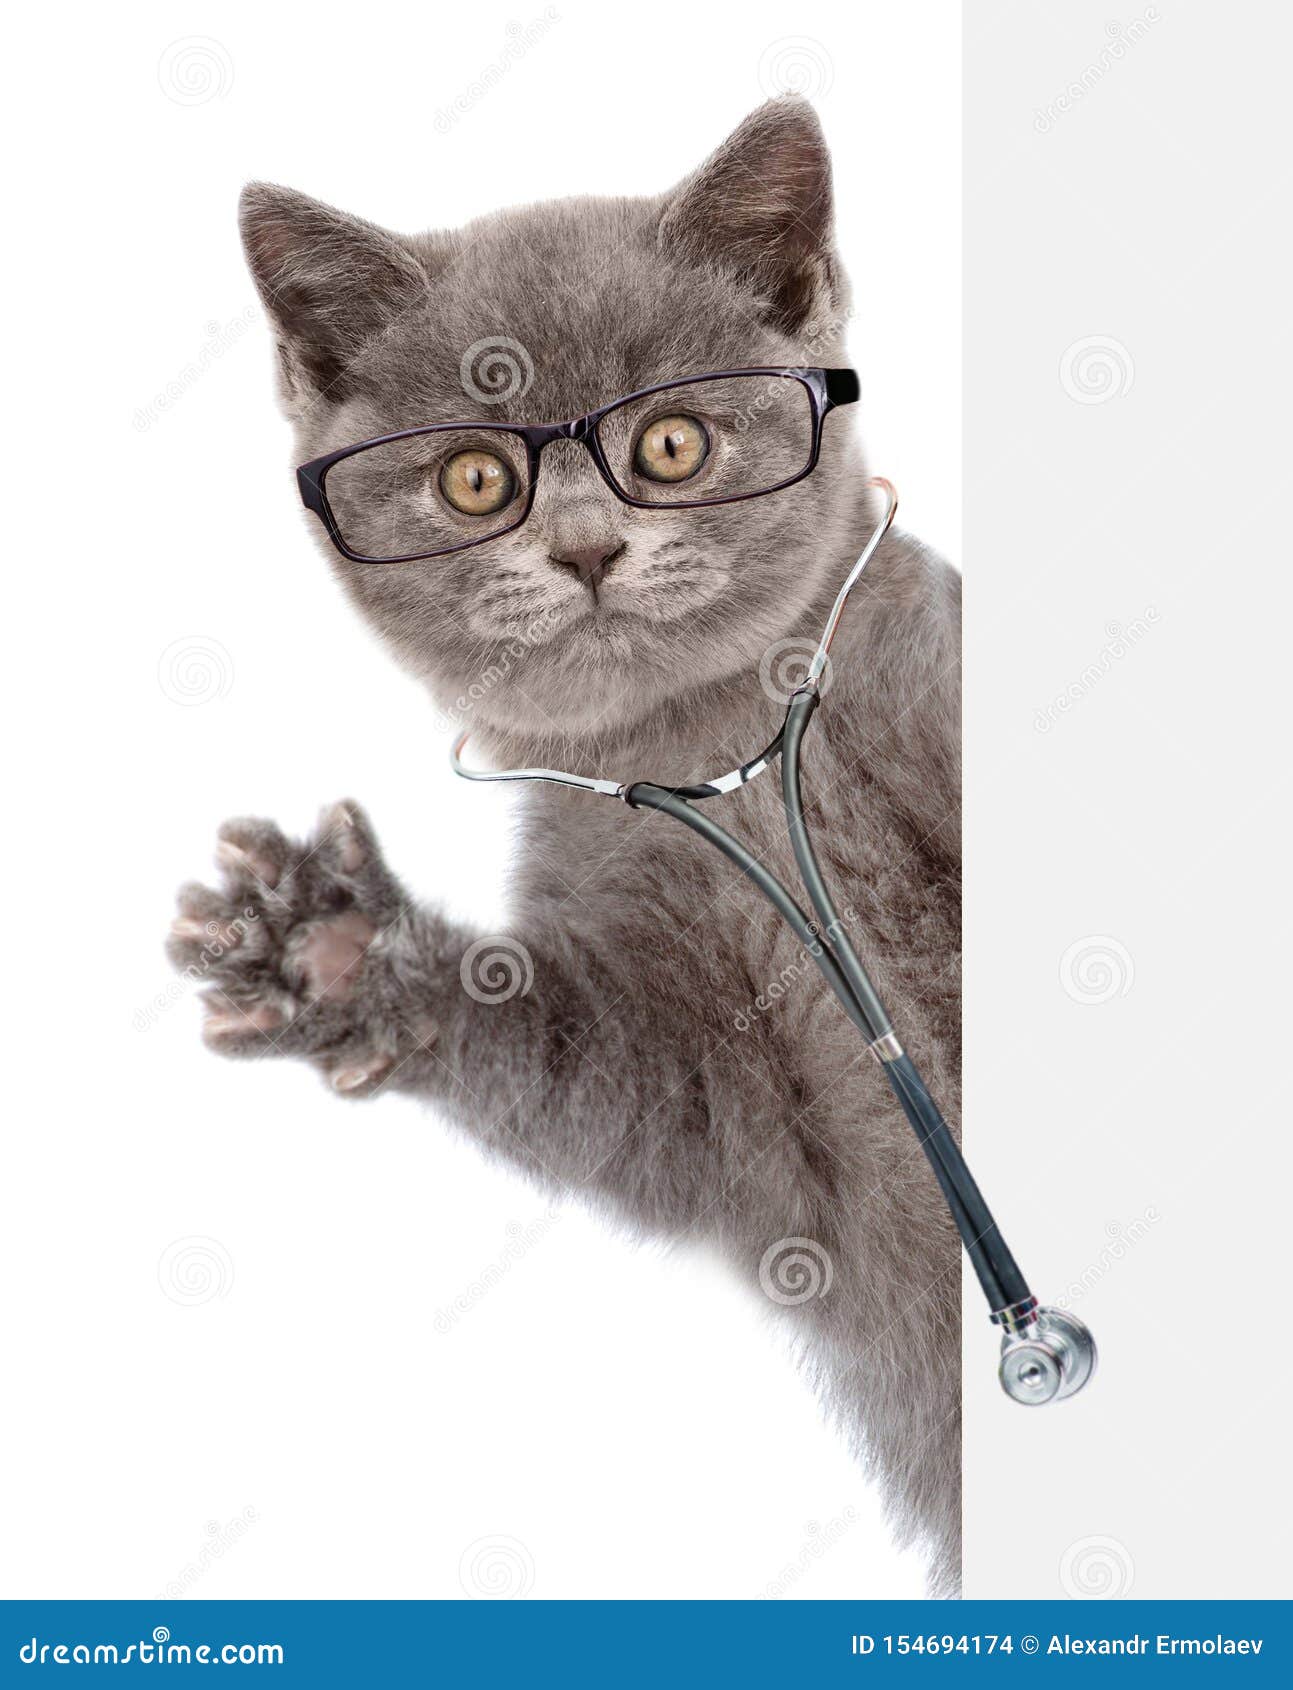 cat with eyeglasses and with a stethoscope on his neck peeks out from behind a banner.  on white background